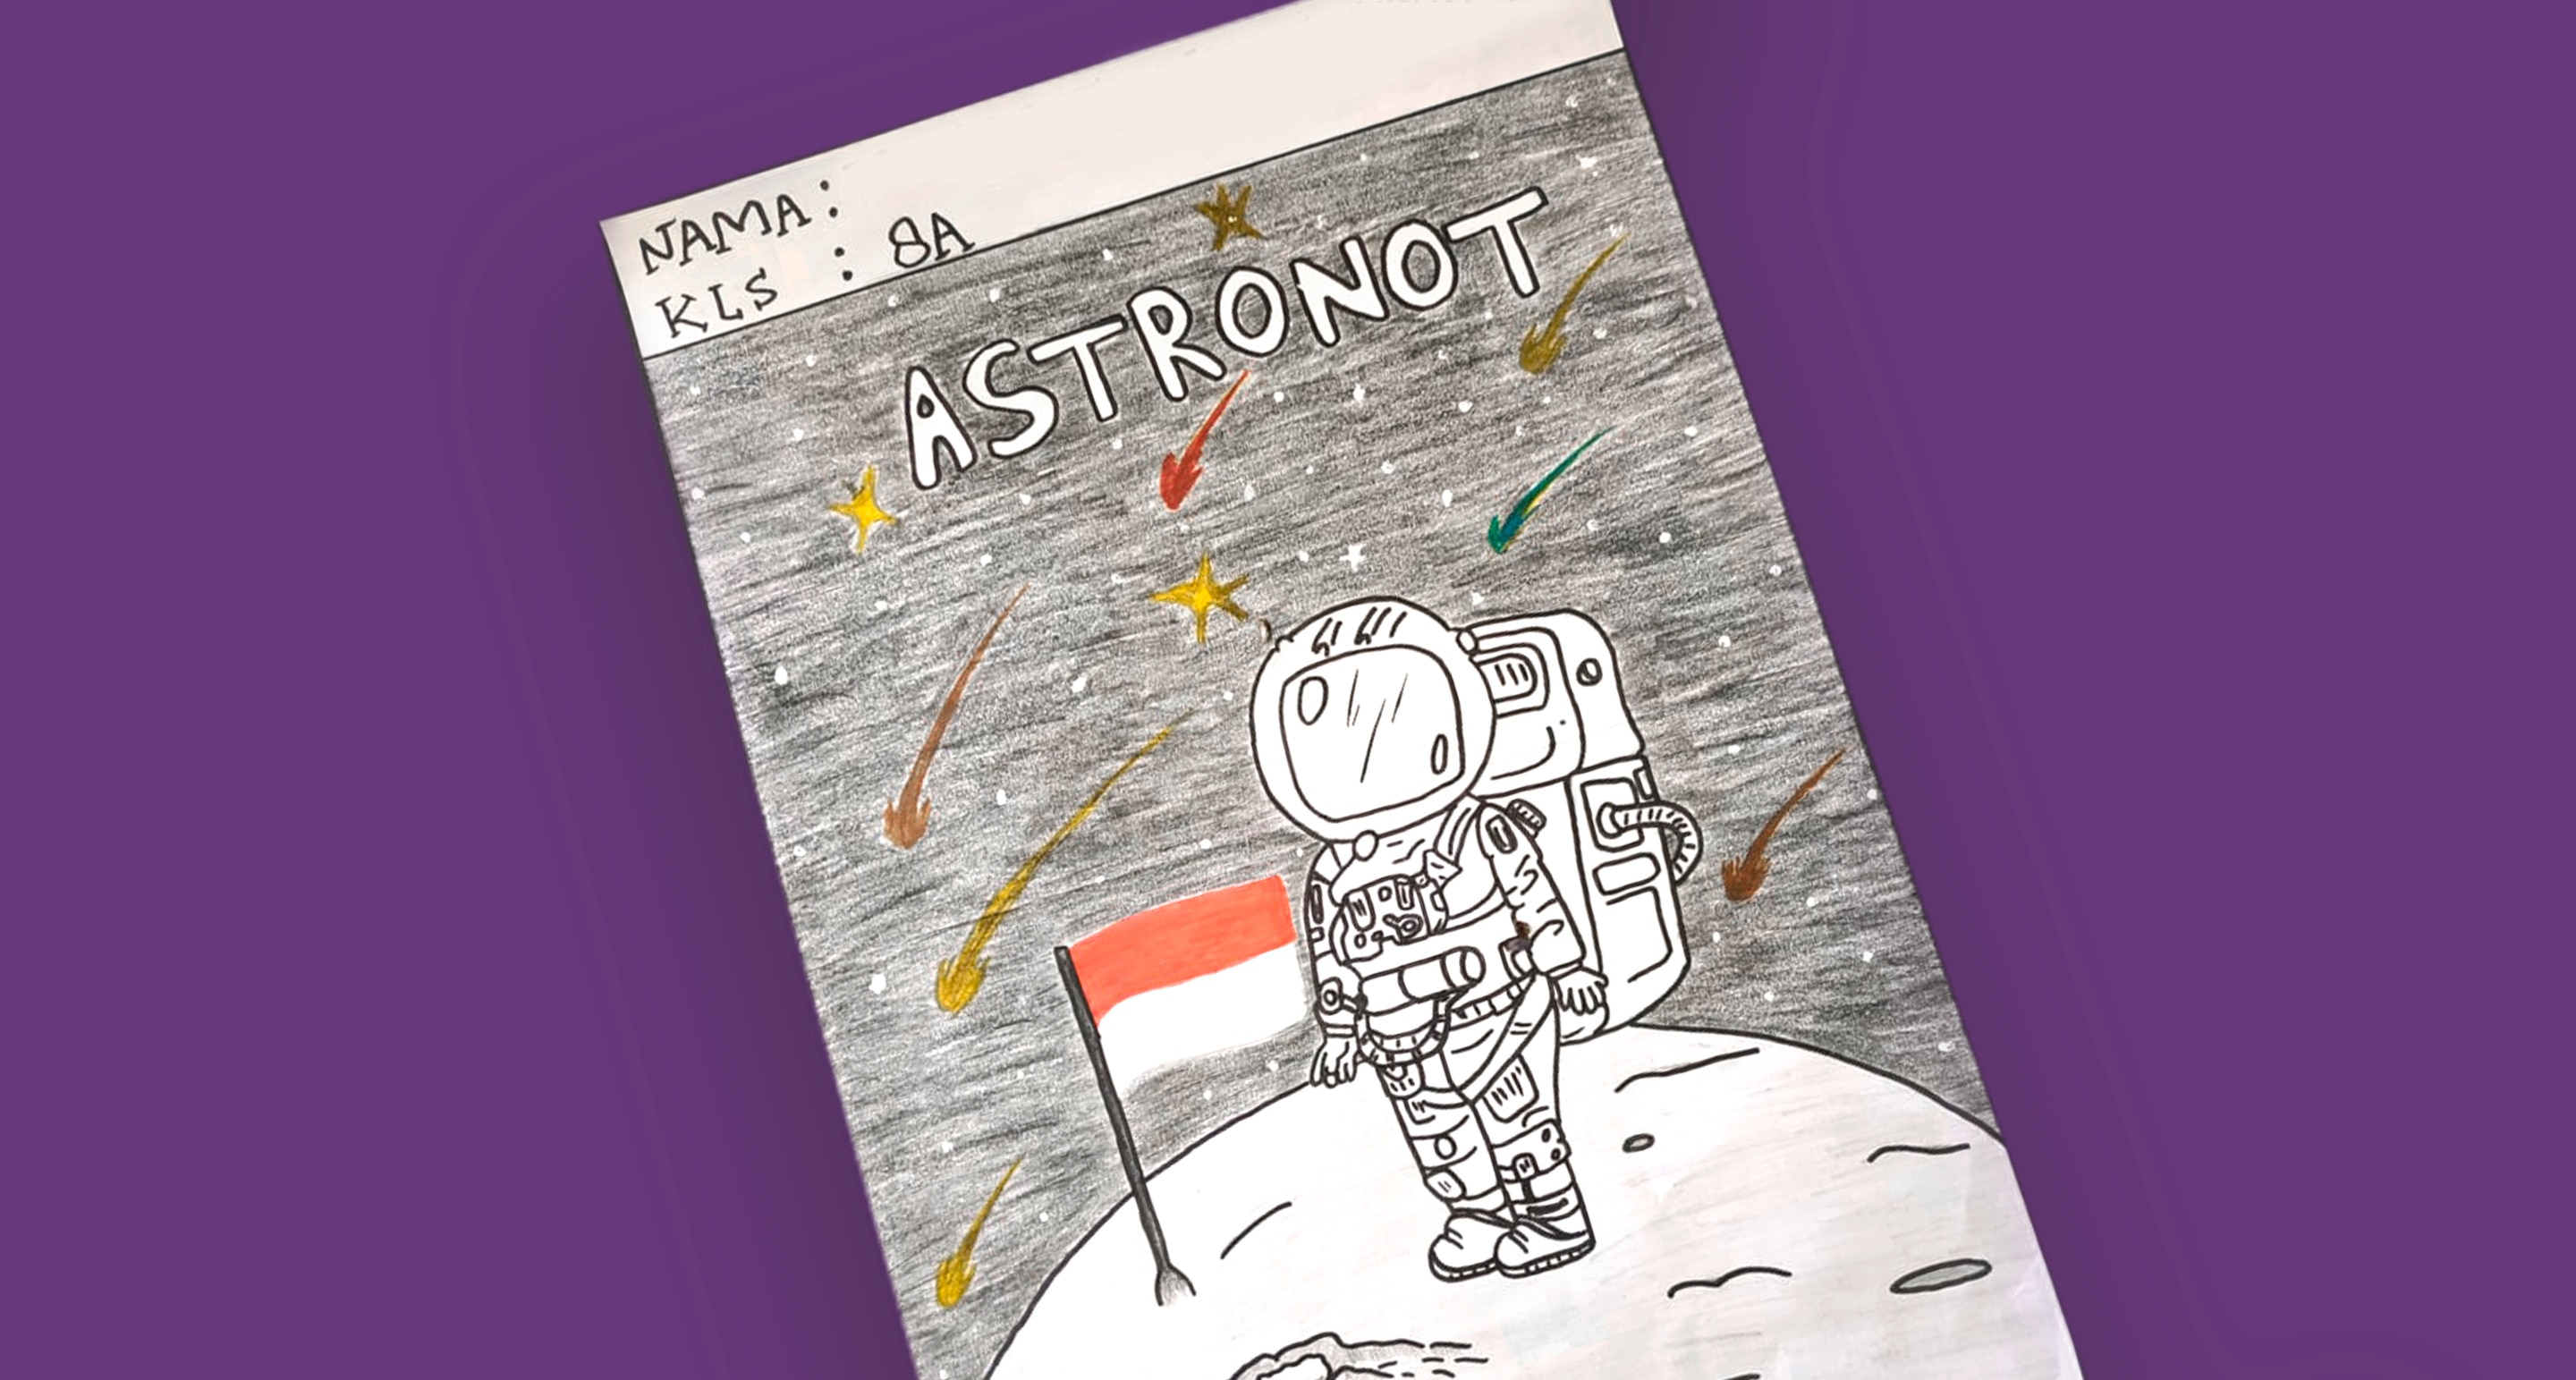 Astronot image